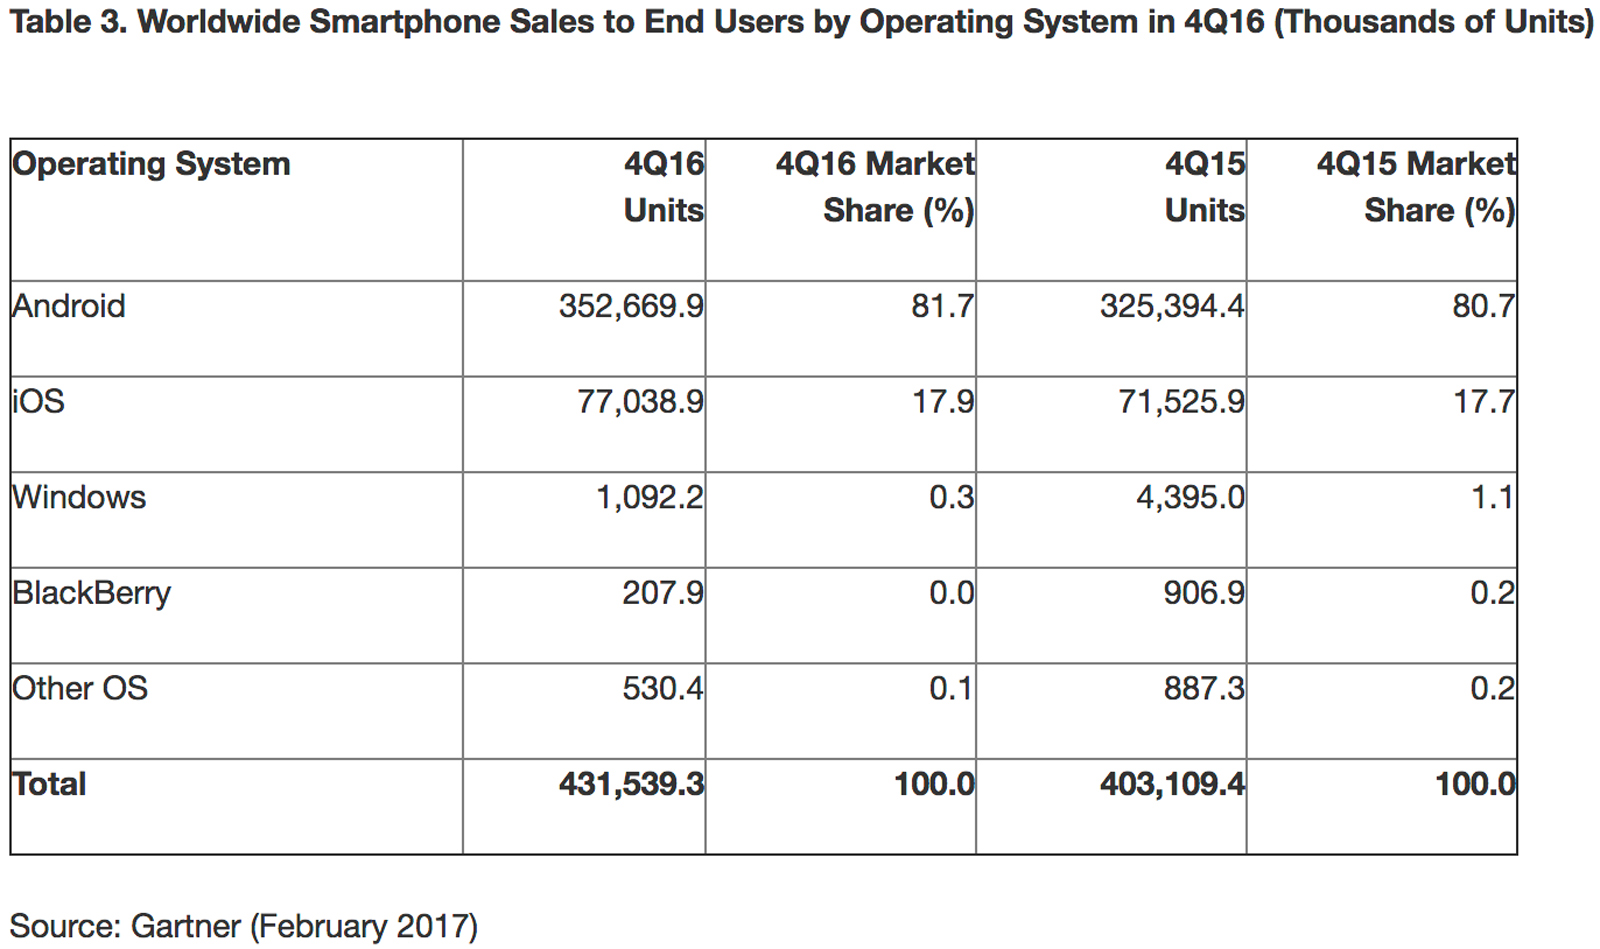 Smartphone OS market share in Q4 2016